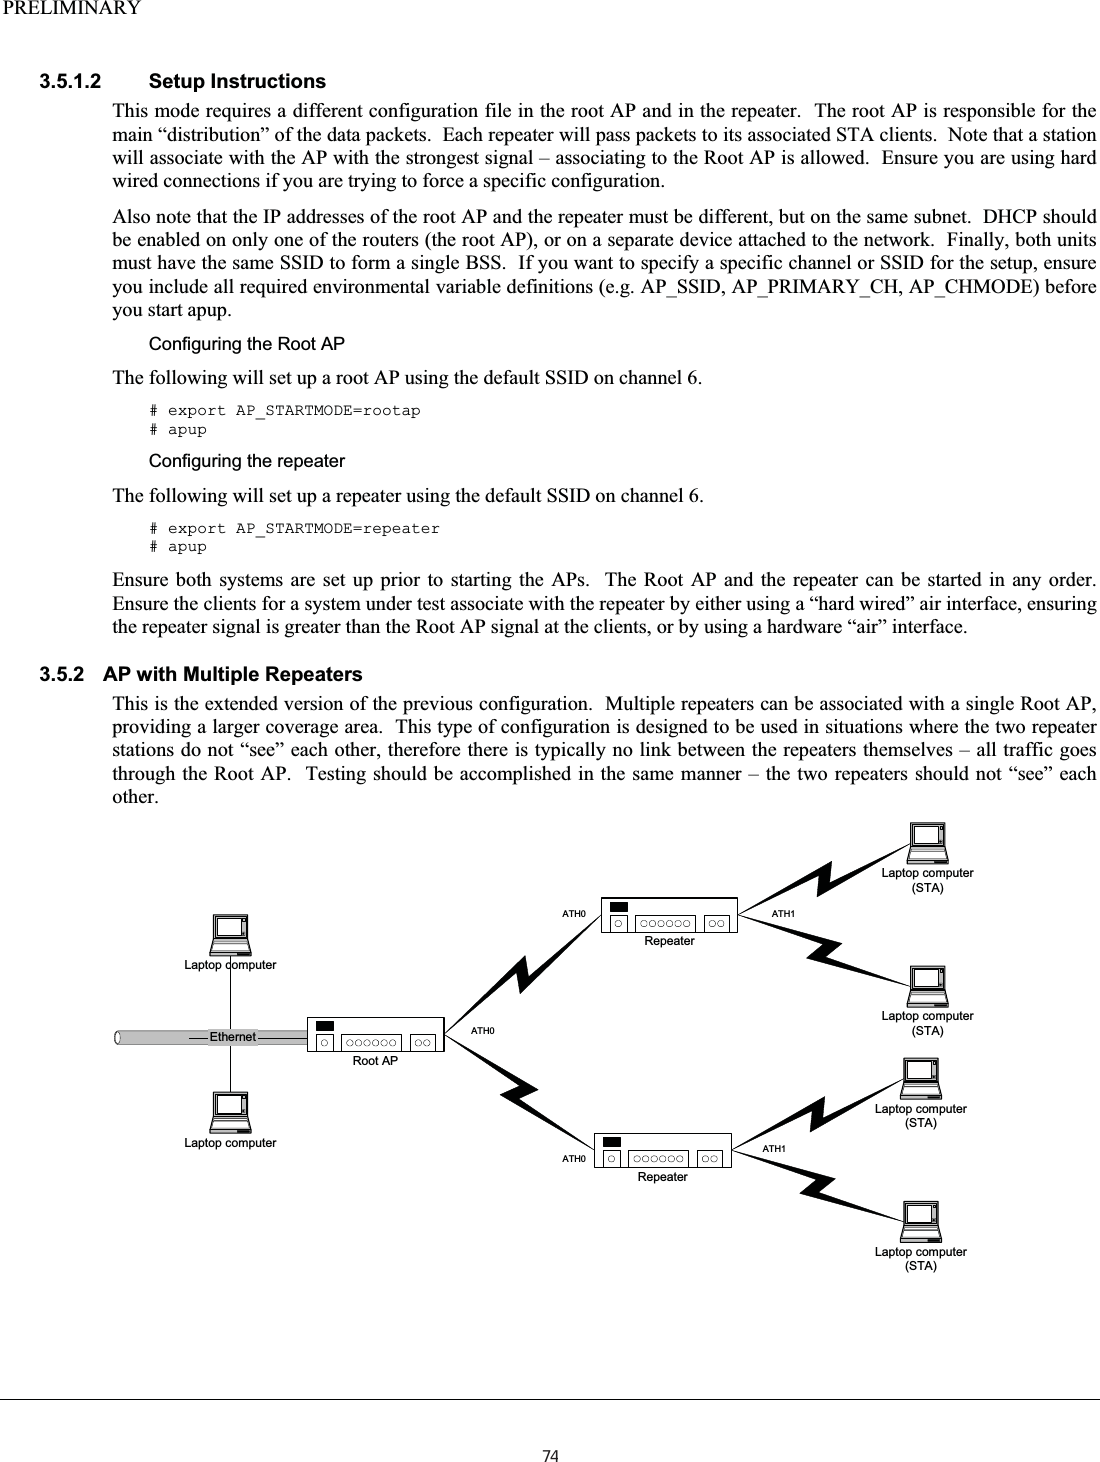 PRELIMINARY  3.5.1.2 Setup Instructions This mode requires a different configuration file in the root AP and in the repeater.  The root AP is responsible for the main “distribution” of the data packets.  Each repeater will pass packets to its associated STA clients.  Note that a station will associate with the AP with the strongest signal – associating to the Root AP is allowed.  Ensure you are using hard wired connections if you are trying to force a specific configuration. Also note that the IP addresses of the root AP and the repeater must be different, but on the same subnet.  DHCP should be enabled on only one of the routers (the root AP), or on a separate device attached to the network.  Finally, both units must have the same SSID to form a single BSS.  If you want to specify a specific channel or SSID for the setup, ensure you include all required environmental variable definitions (e.g. AP_SSID, AP_PRIMARY_CH, AP_CHMODE) before you start apup. Configuring the Root AP The following will set up a root AP using the default SSID on channel 6. # export AP_STARTMODE=rootap # apup Configuring the repeater The following will set up a repeater using the default SSID on channel 6. # export AP_STARTMODE=repeater # apup Ensure both systems are set up prior to starting the APs.  The Root AP and the repeater can be started in any order.  Ensure the clients for a system under test associate with the repeater by either using a “hard wired” air interface, ensuring the repeater signal is greater than the Root AP signal at the clients, or by using a hardware “air” interface. 3.5.2  AP with Multiple Repeaters This is the extended version of the previous configuration.  Multiple repeaters can be associated with a single Root AP, providing a larger coverage area.  This type of configuration is designed to be used in situations where the two repeater stations do not “see” each other, therefore there is typically no link between the repeaters themselves – all traffic goes through the Root AP.  Testing should be accomplished in the same manner – the two repeaters should not “see” each other. EthernetLaptop computer(STA)Root APLaptop computerLaptop computer(STA)Laptop computerRepeaterLaptop computer(STA)Laptop computer(STA)RepeaterATH0ATH0ATH0ATH1ATH174